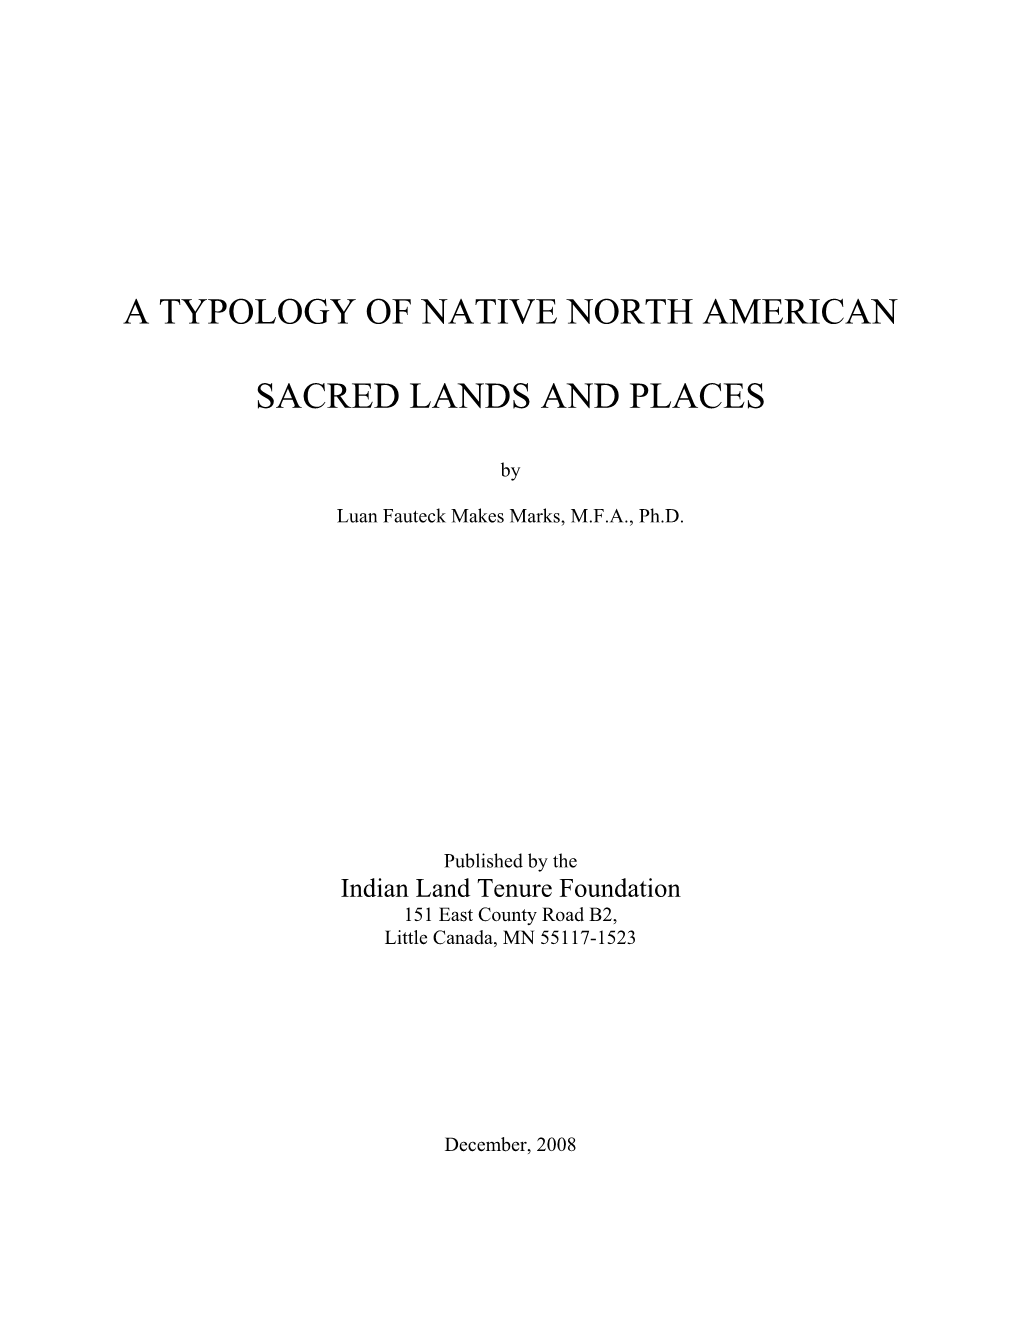 A Typology of Native North American Sacred Lands And